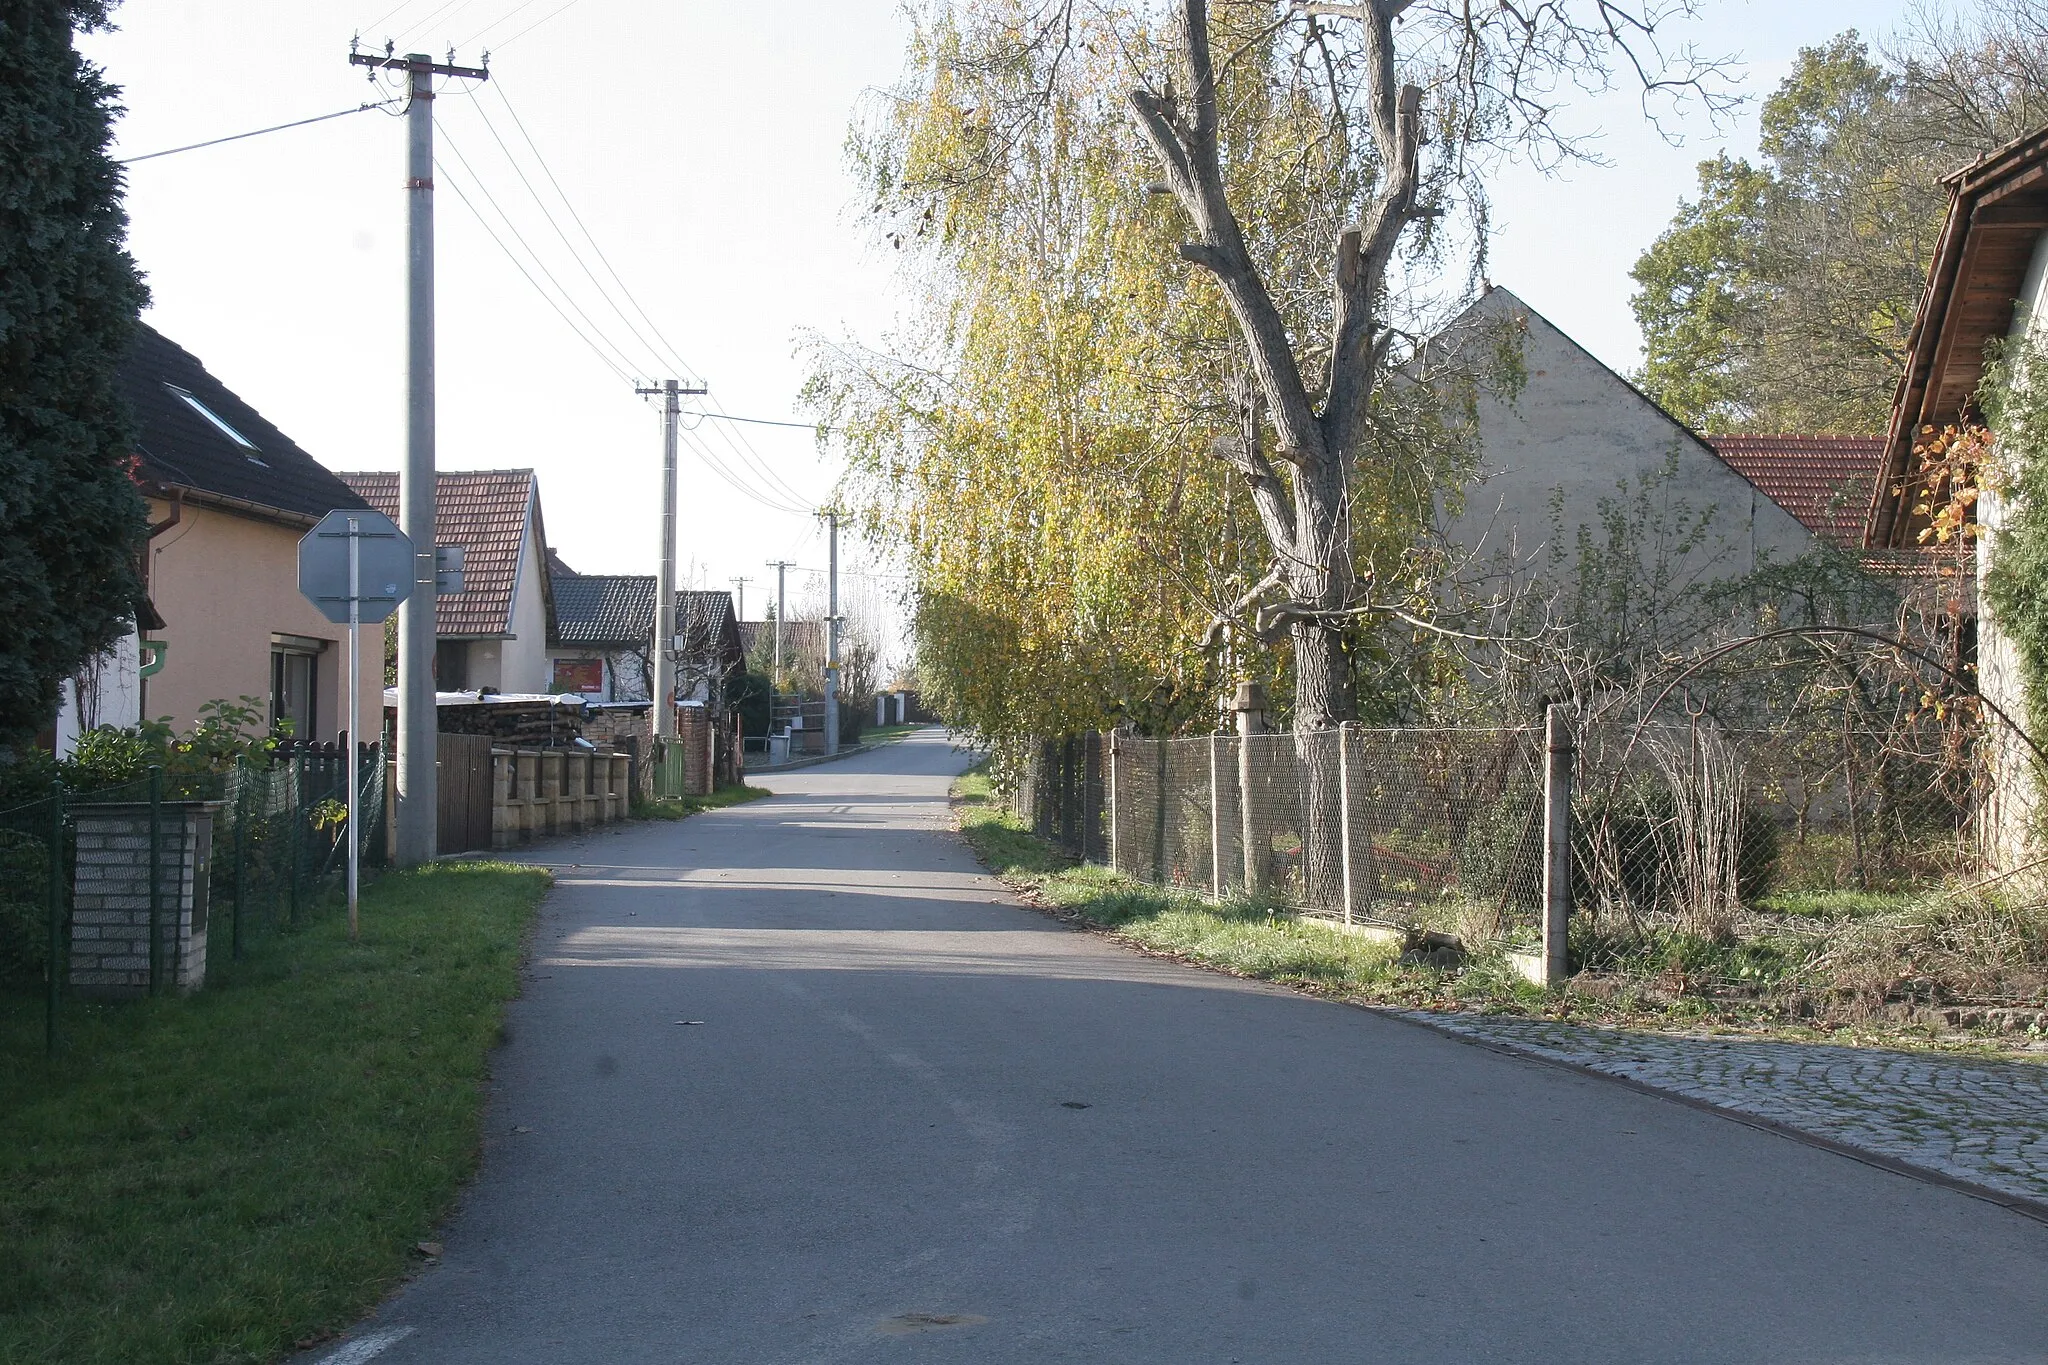 Photo showing: Podlesí čp. 81
Camera location 50° 05′ 03.58″ N, 15° 58′ 56.75″ E View this and other nearby images on: OpenStreetMap 50.084329;   15.982431

This file was created as a part of the photographic program of Wikimedia Czech Republic. Project: Foto českých obcí The program supports Wikimedia Commons photographers in the Czech Republic.